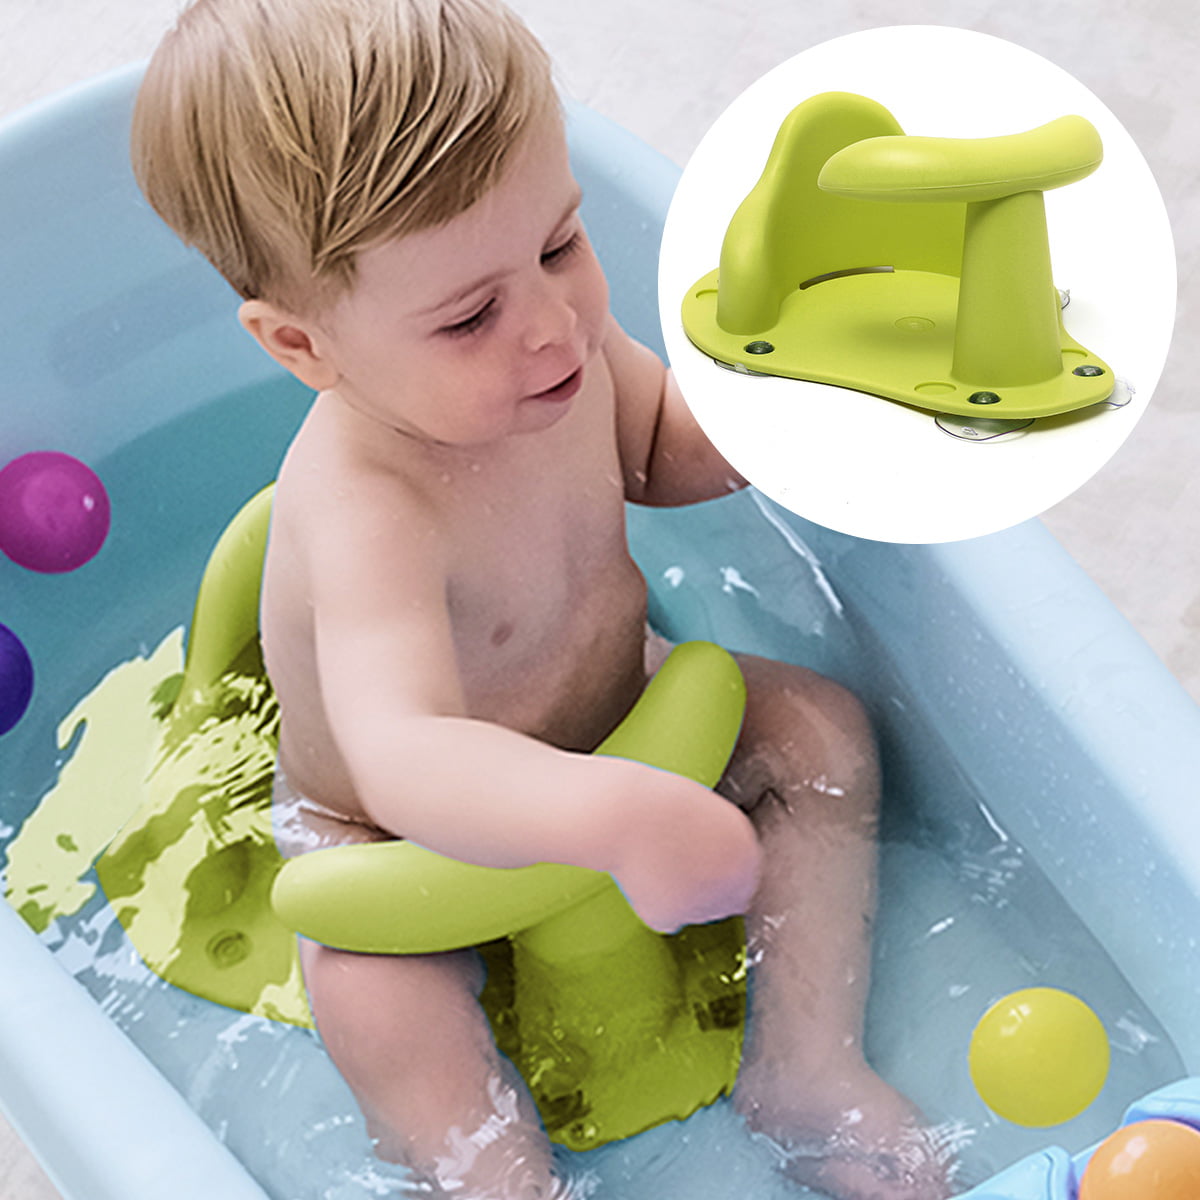 3 In 1 Baby Toddler Child Bath Support Seat Safety Bathing Safe Dinning Play BPA FREE GREEN